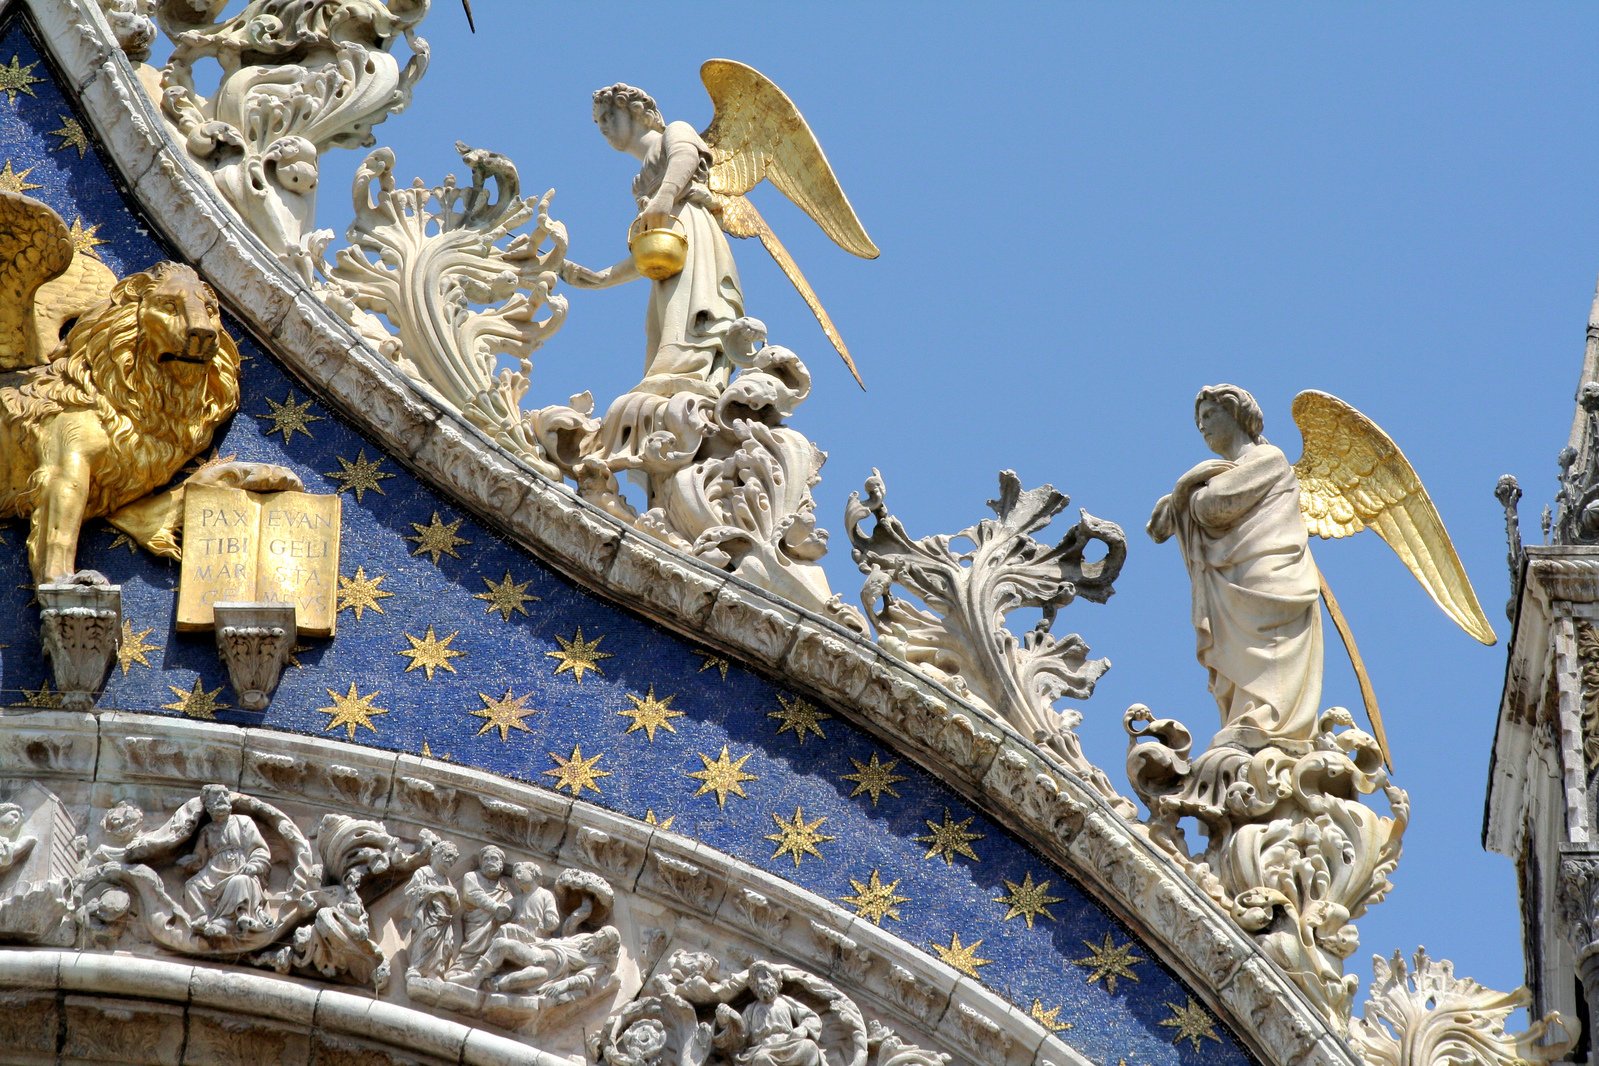 close up of ornate building with gold angels